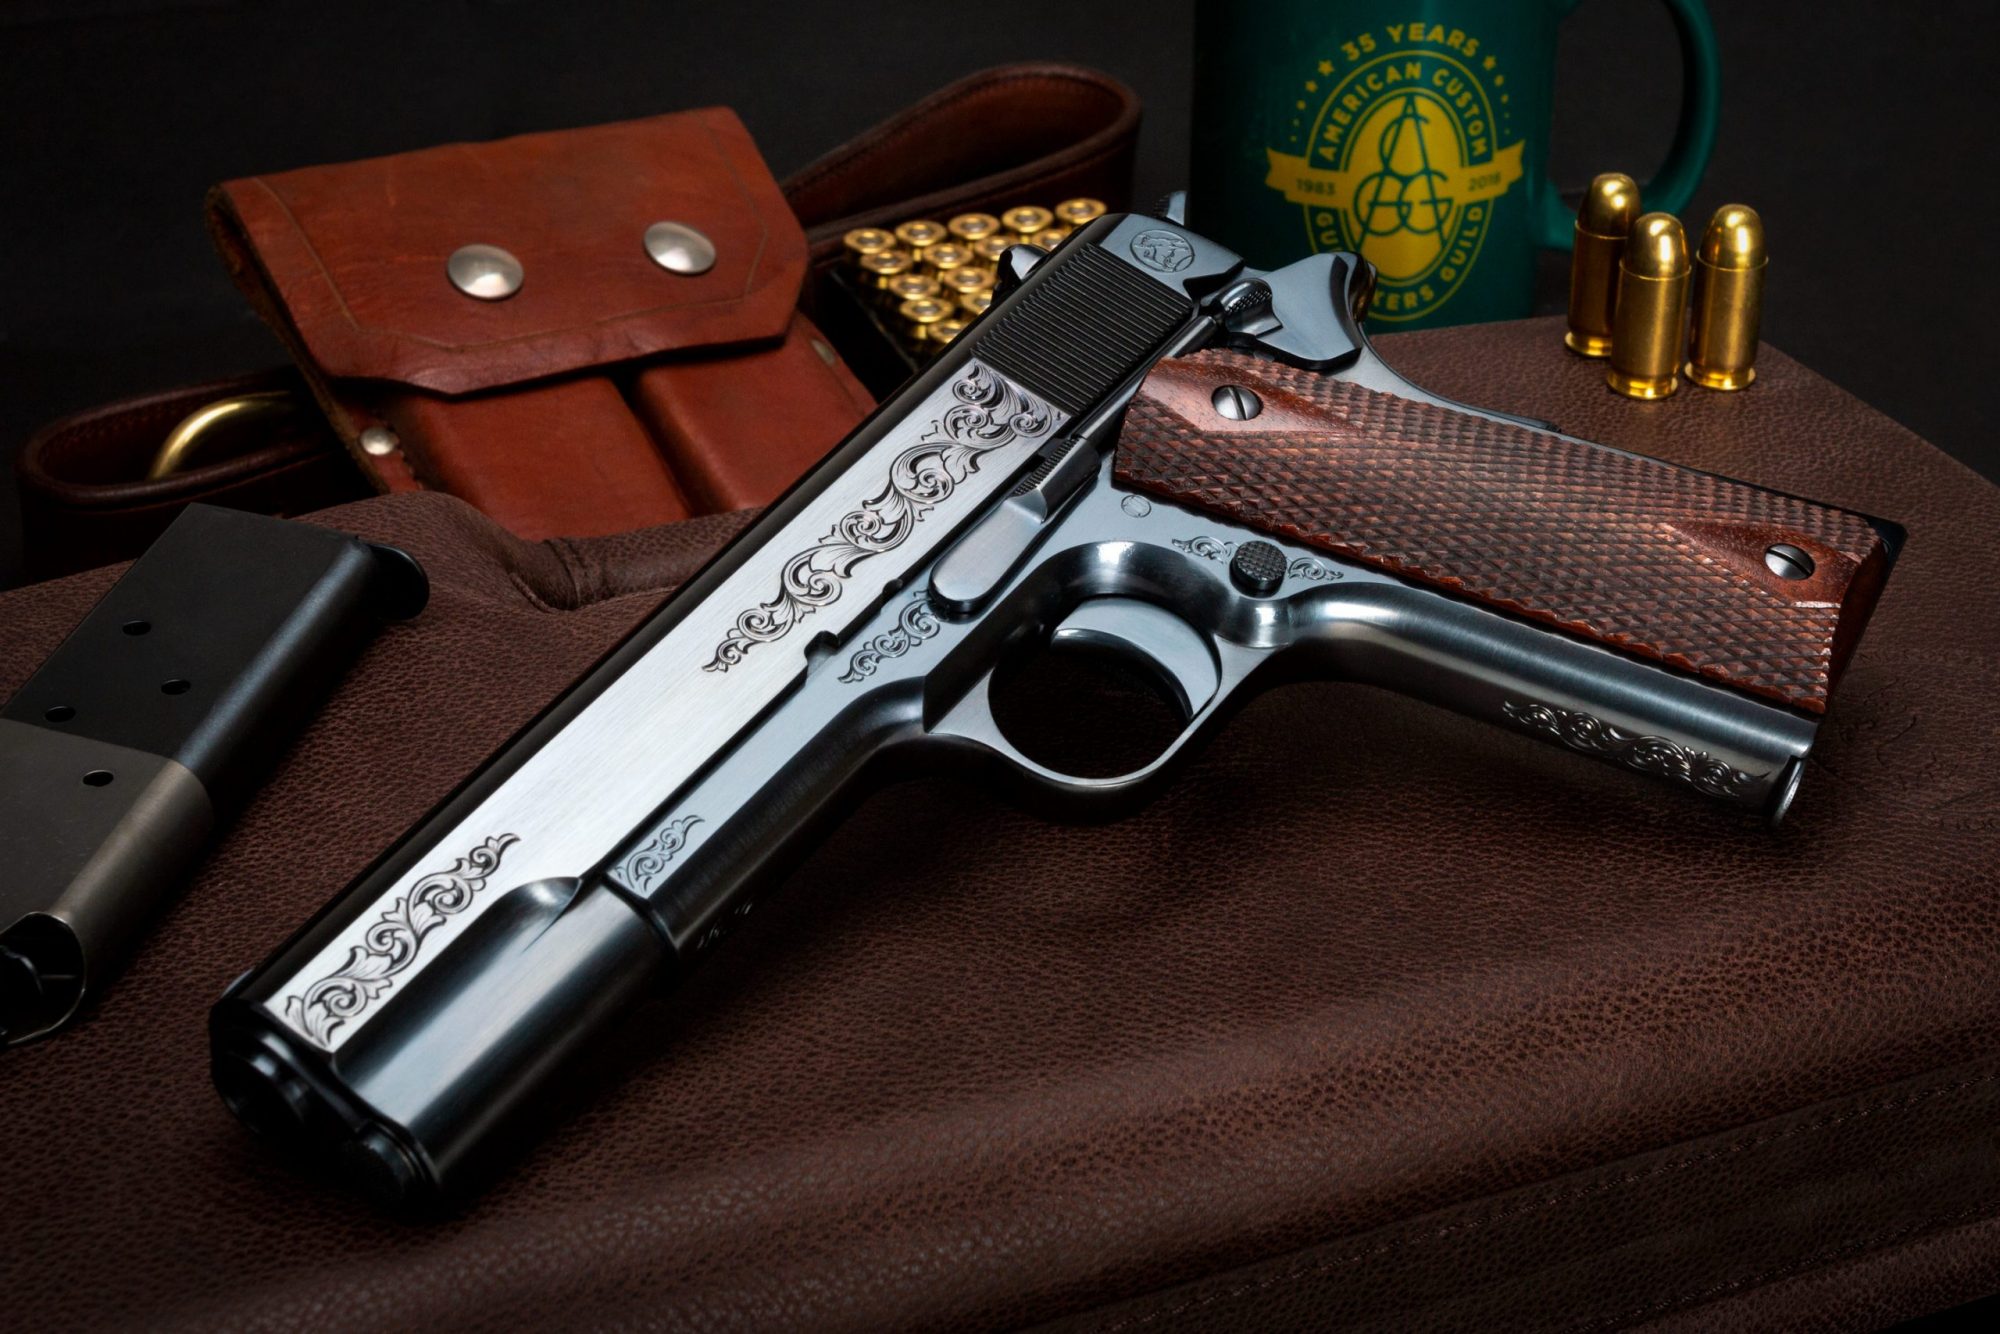 Engraved Turnbull Model 1911 with high polish charcoal bluing